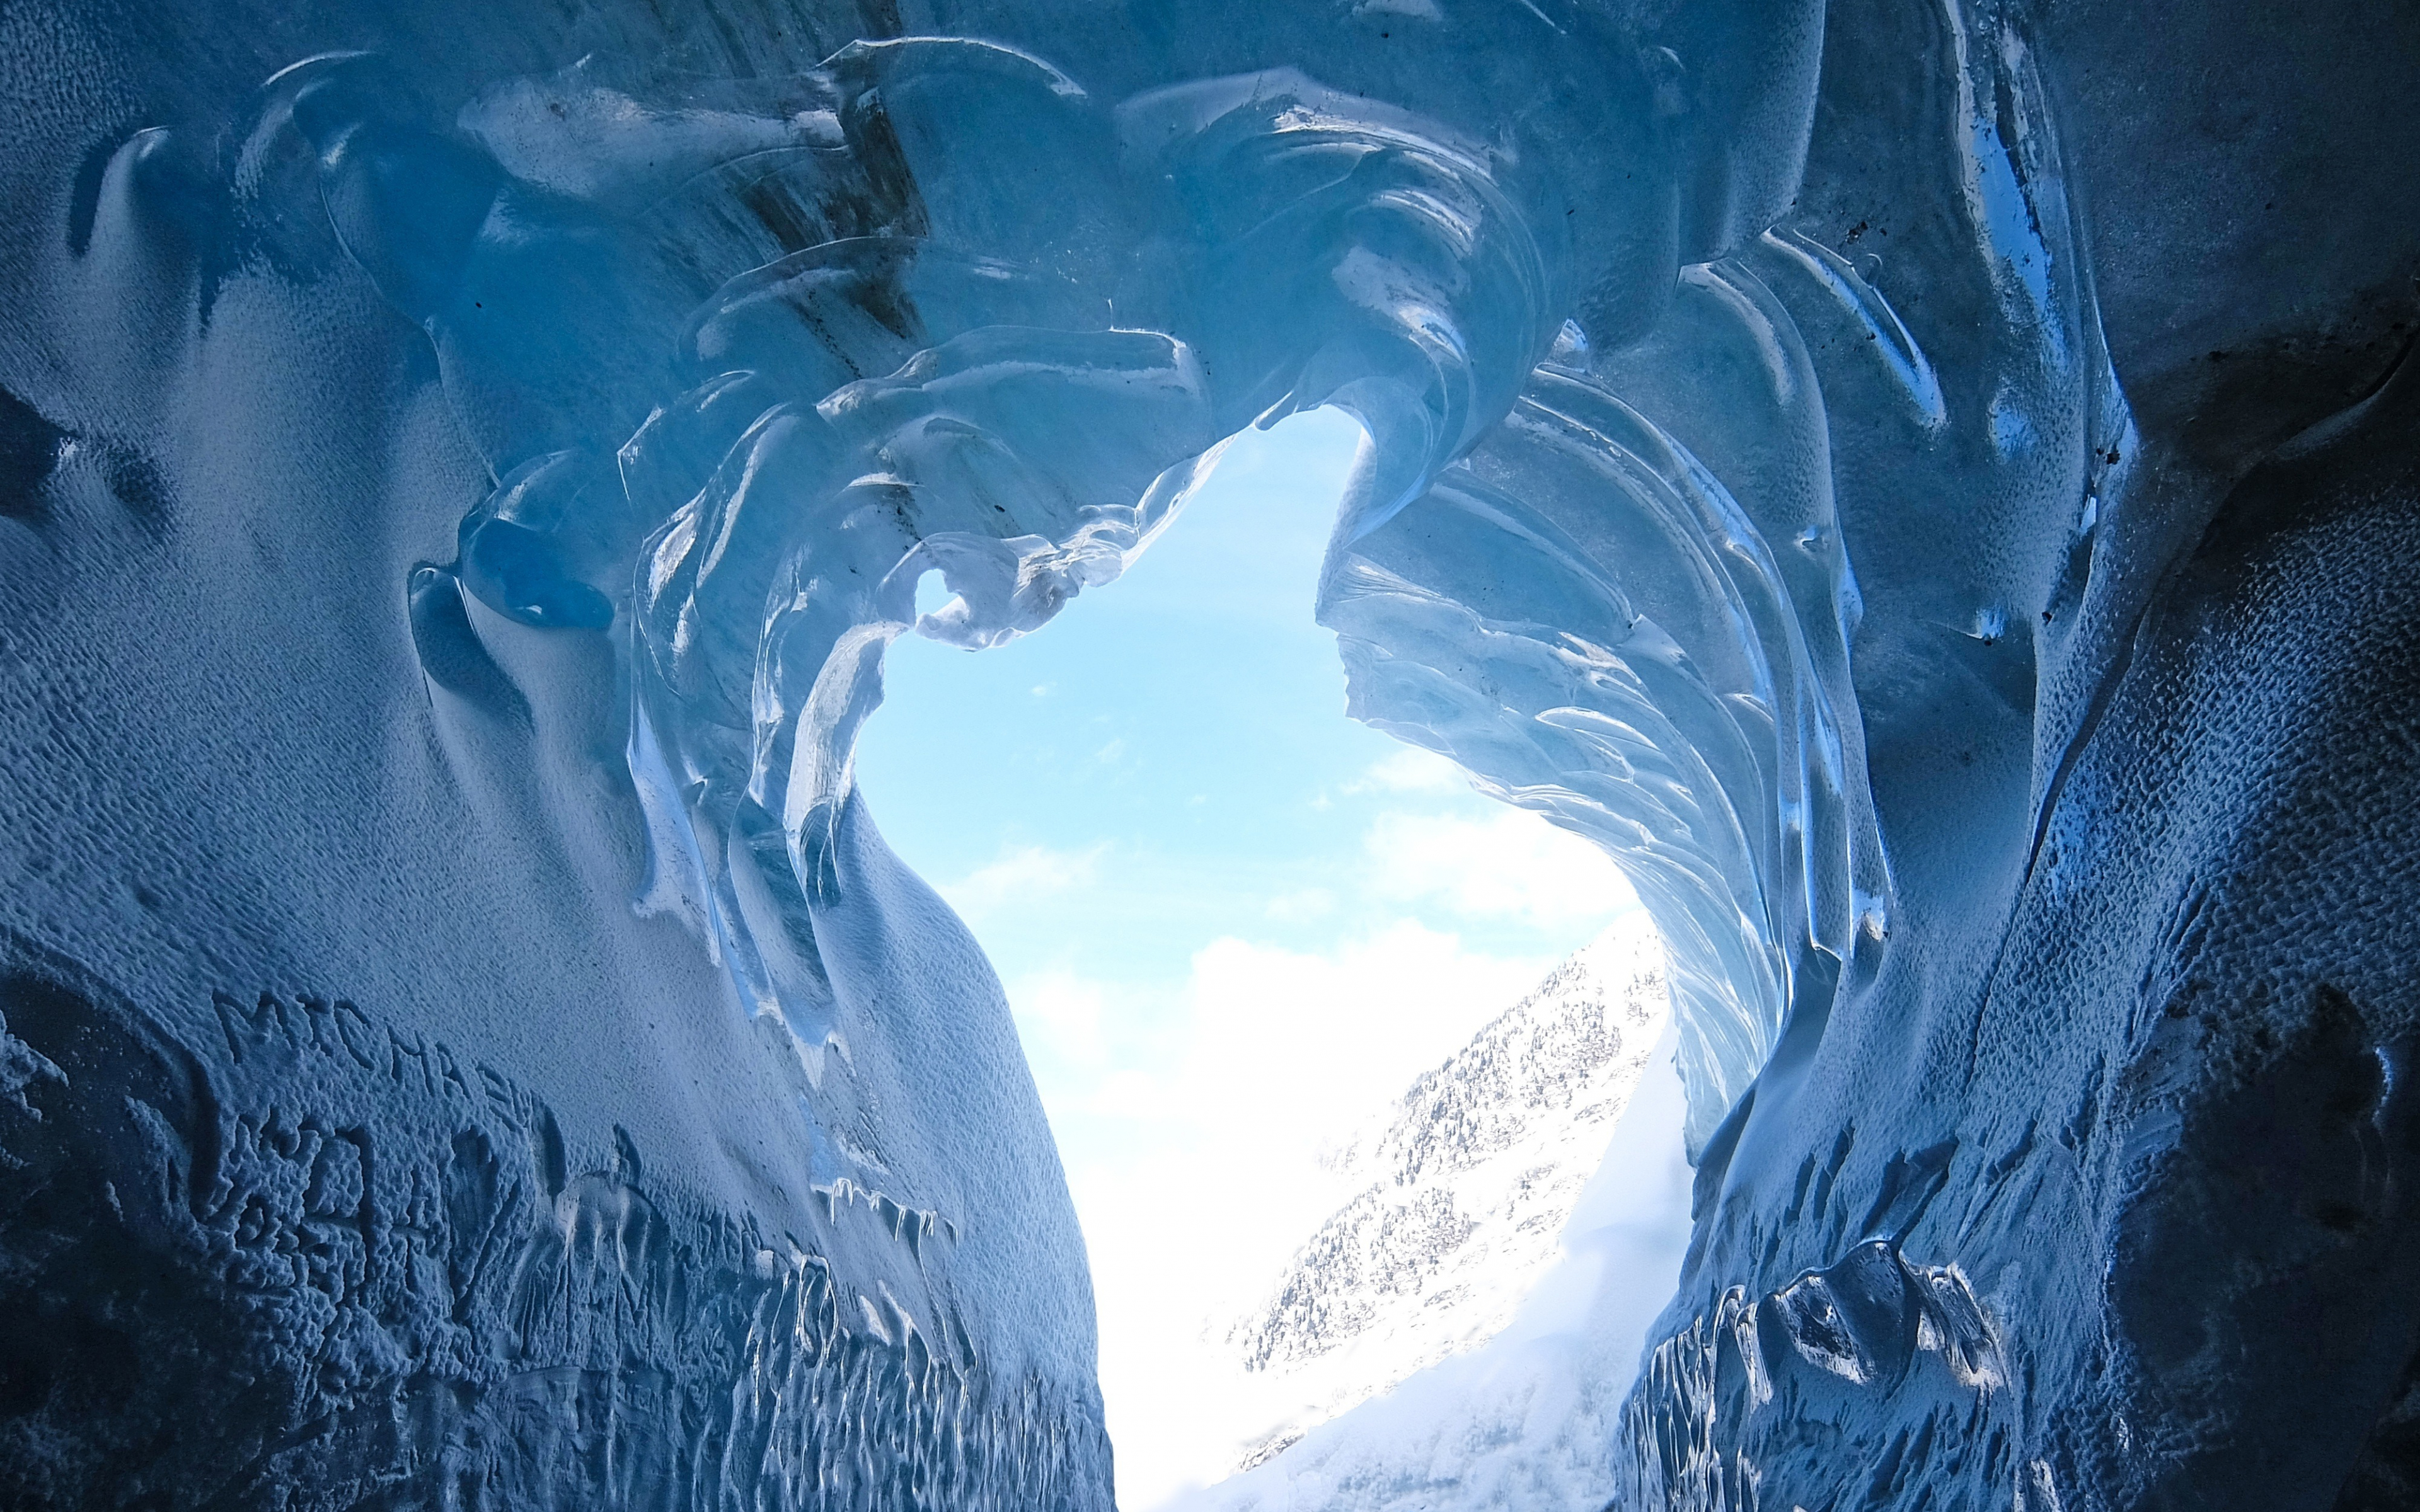 Download 3840x2400 Wallpaper Ice Cave Glacier Nature 4k Ultra Hd 16 10 Widescreen 3840x2400 Hd Image Background 1686